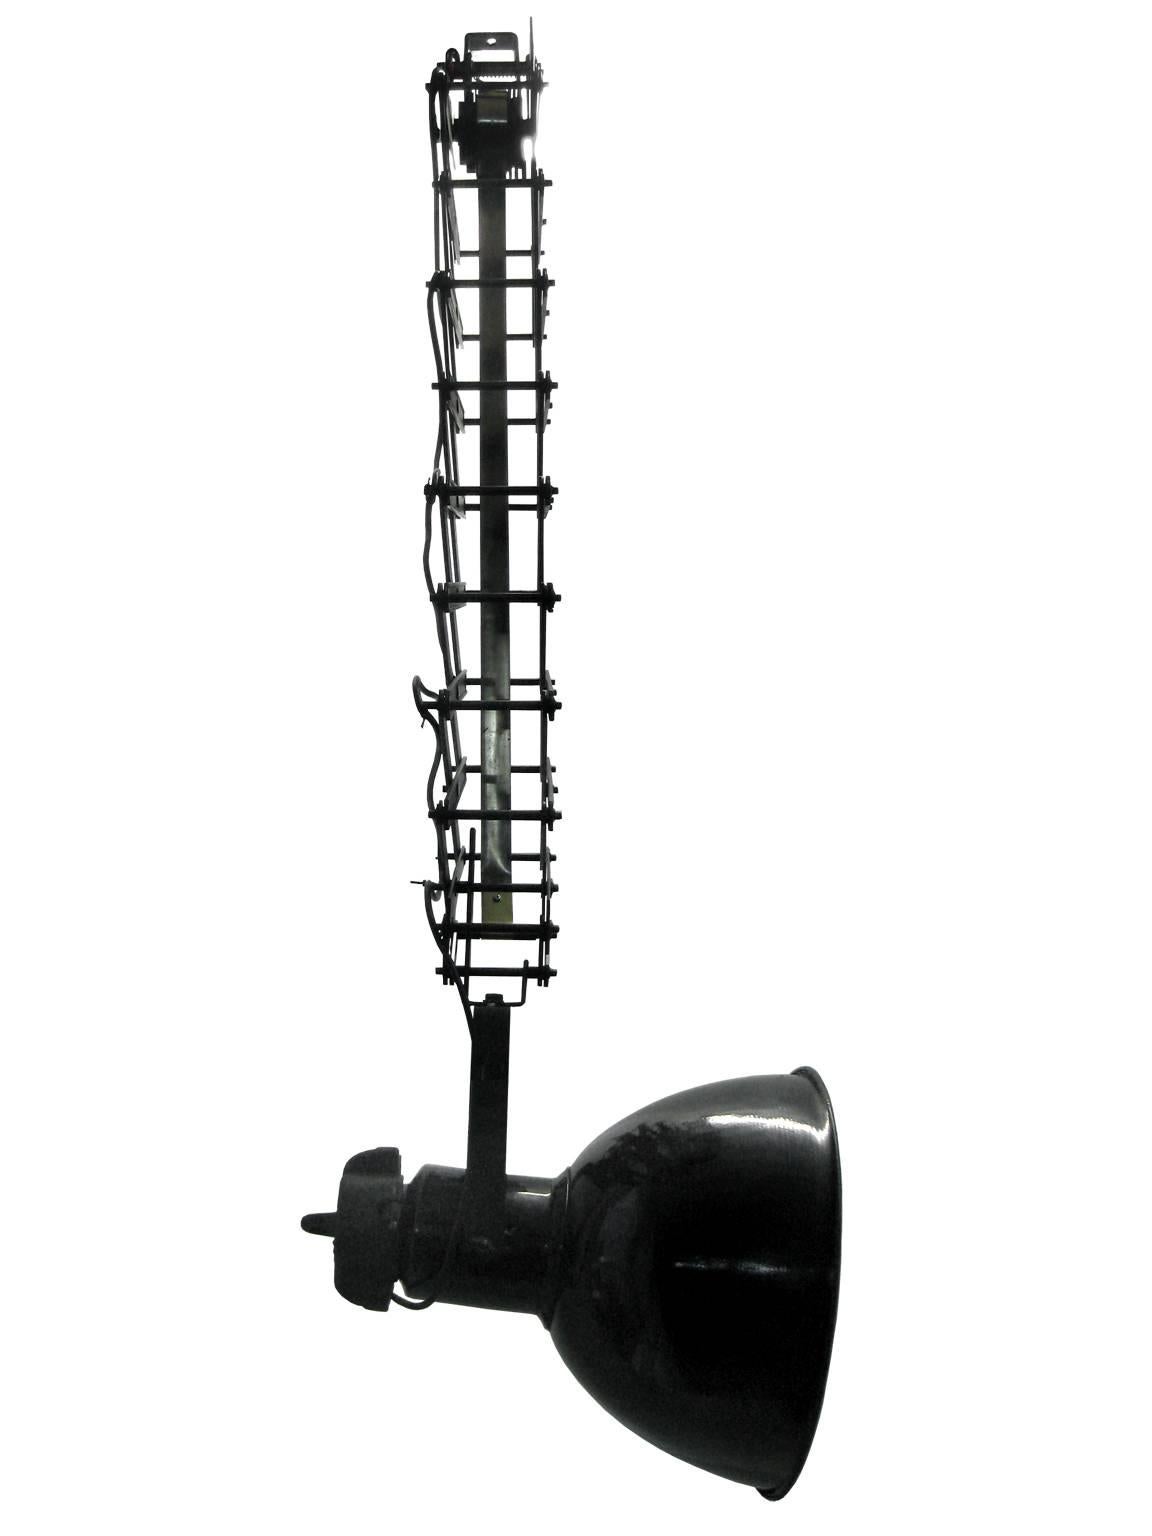 Scissor spring with Industrial hanging lamp. Black enamel white interior.
Measures: Max. length 250cm min. length 80cm. E27 fitting max 150W.

All lamps have been made suitable by international standards for incandescent light bulbs,